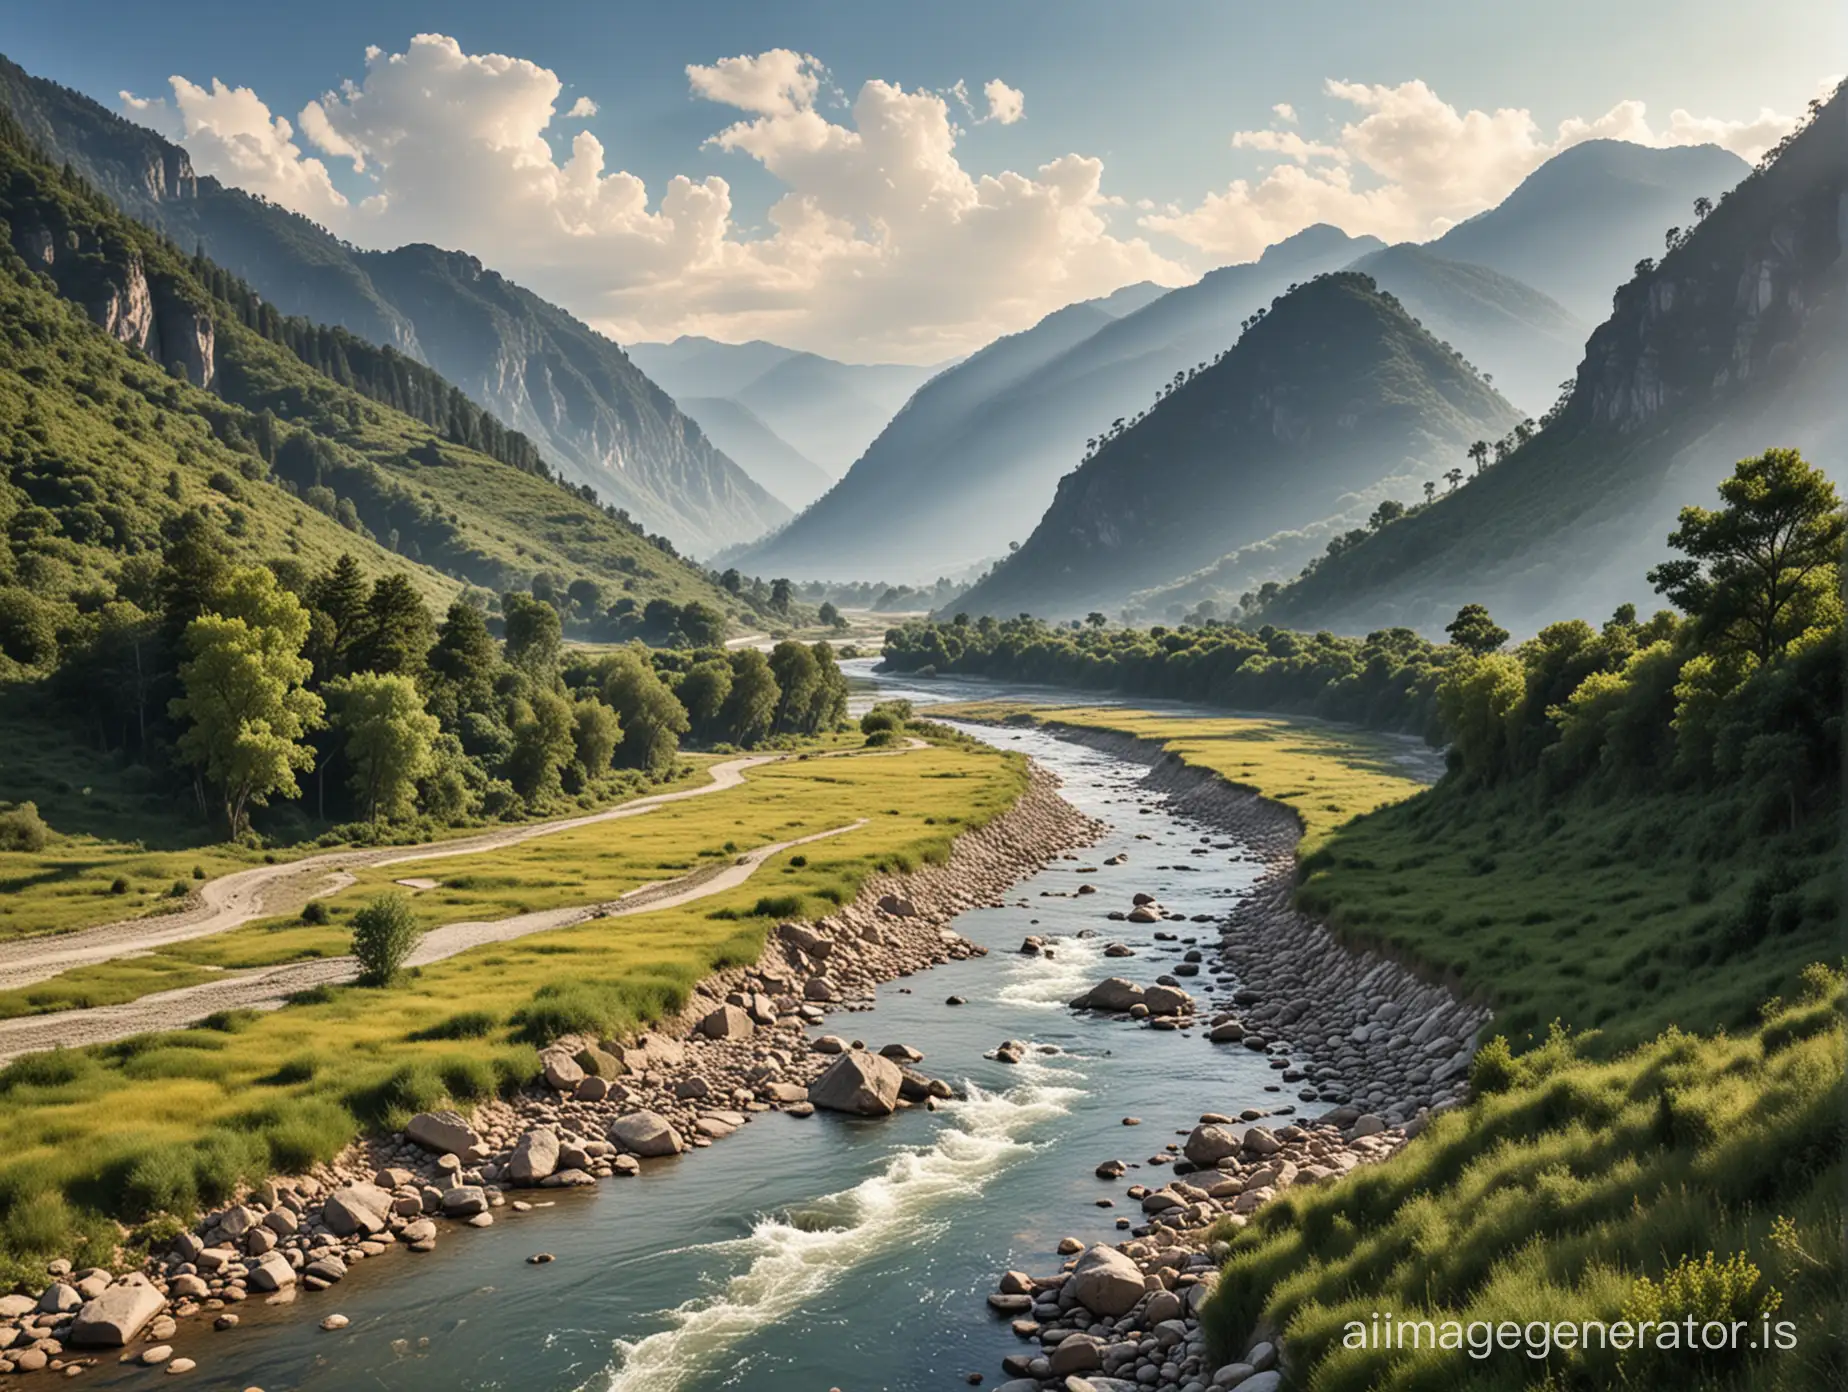 Scenic-Mountain-Landscape-with-Serene-River-View